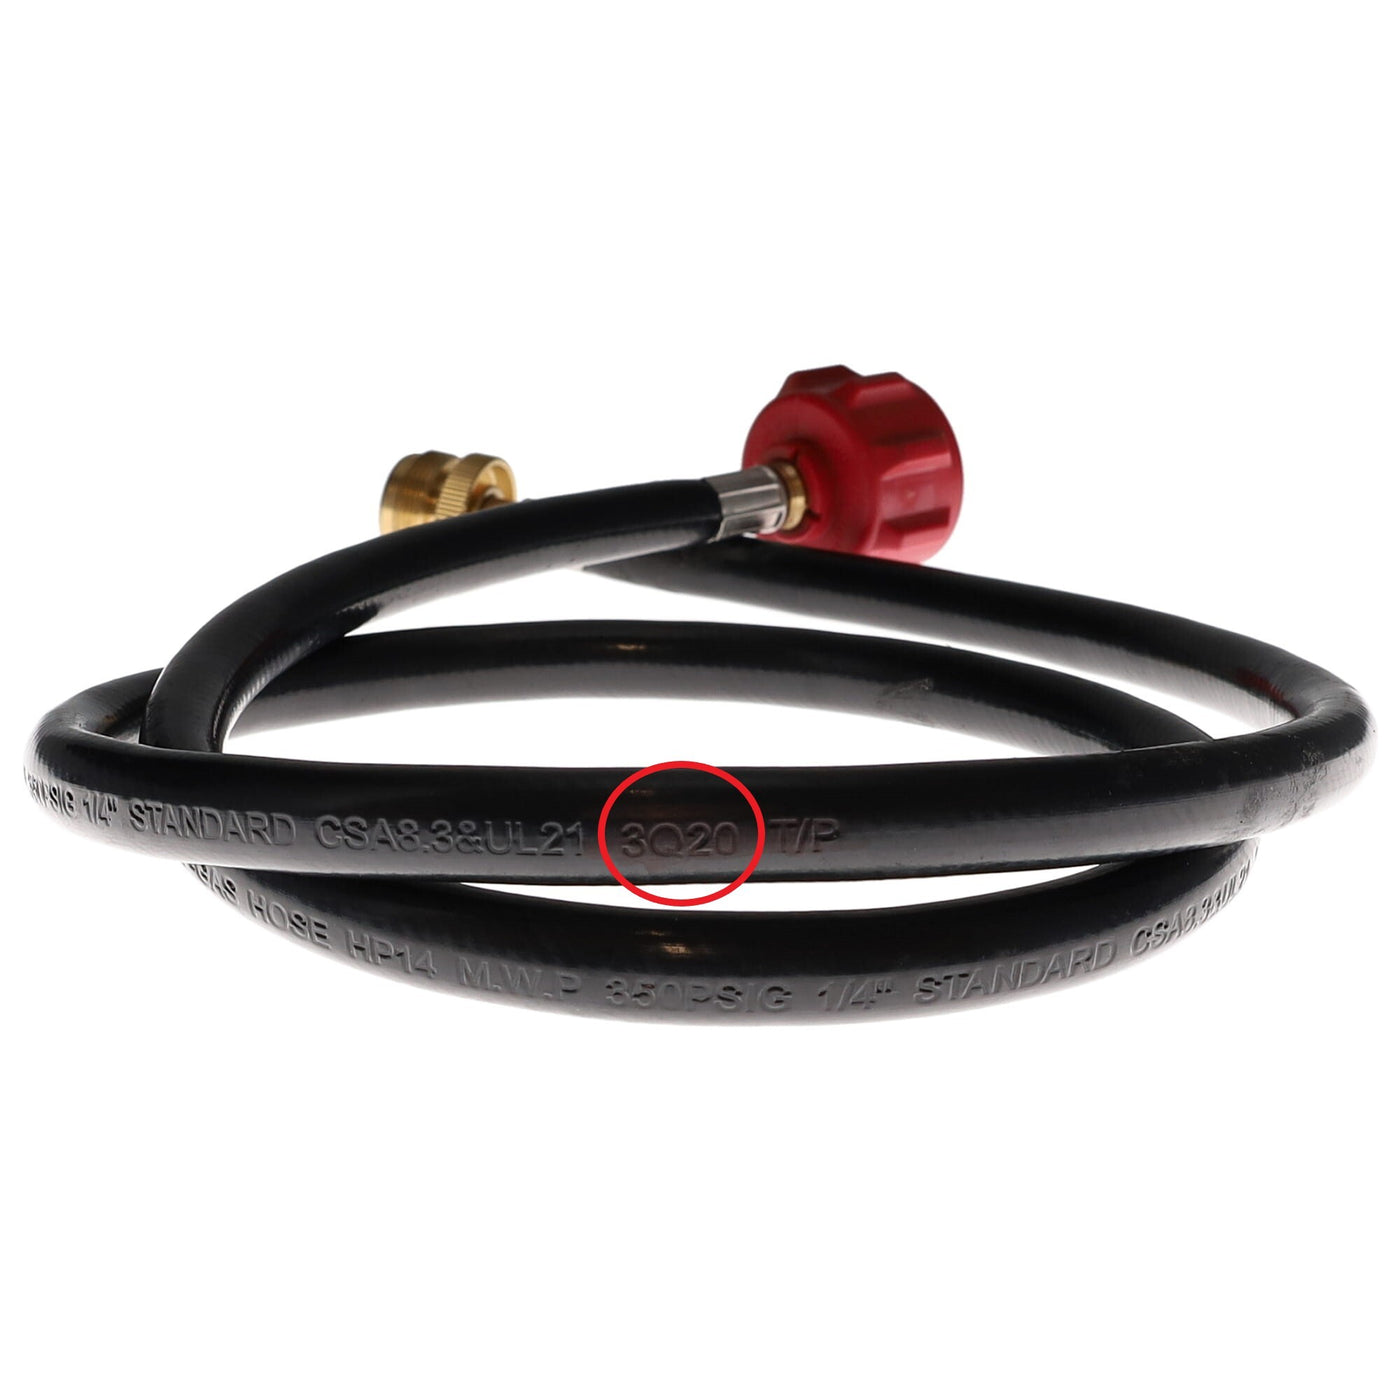 Recall Notice for 50140 Propane Adapter Hose - Purchased from 12/11/20 - 2/9/21